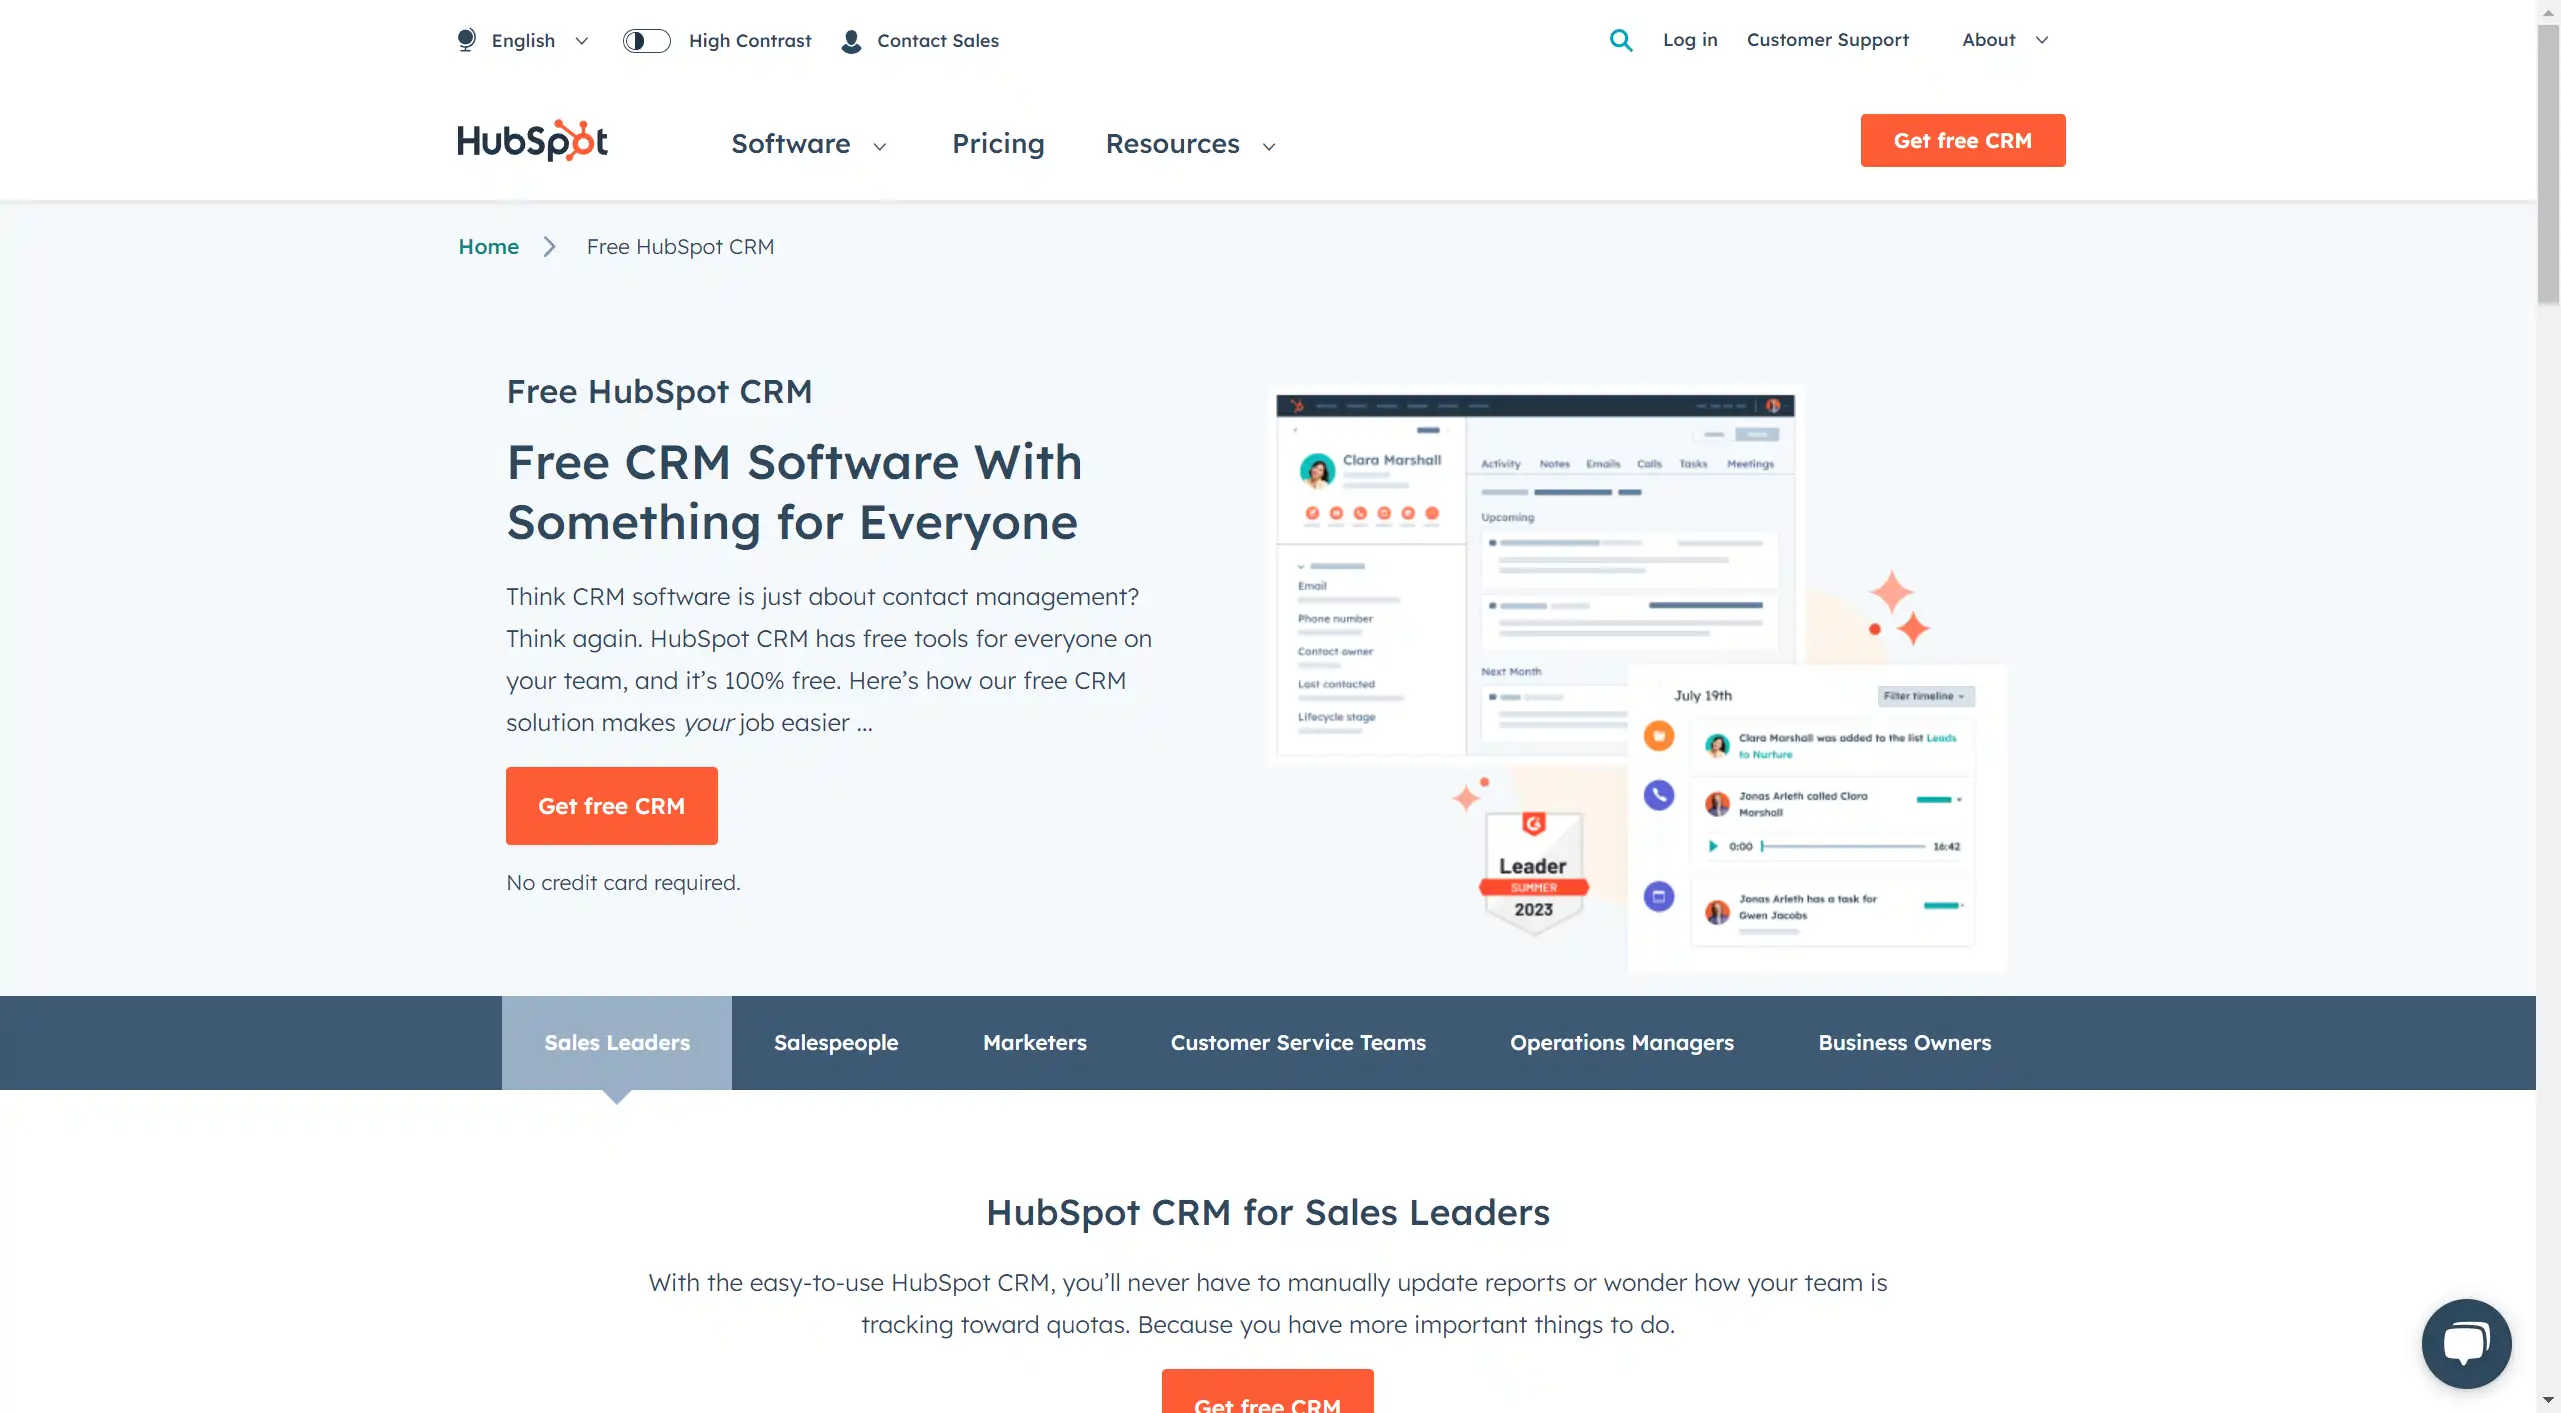 HubSpot's free CRM Software page displaying all the features it provides with visuals and text